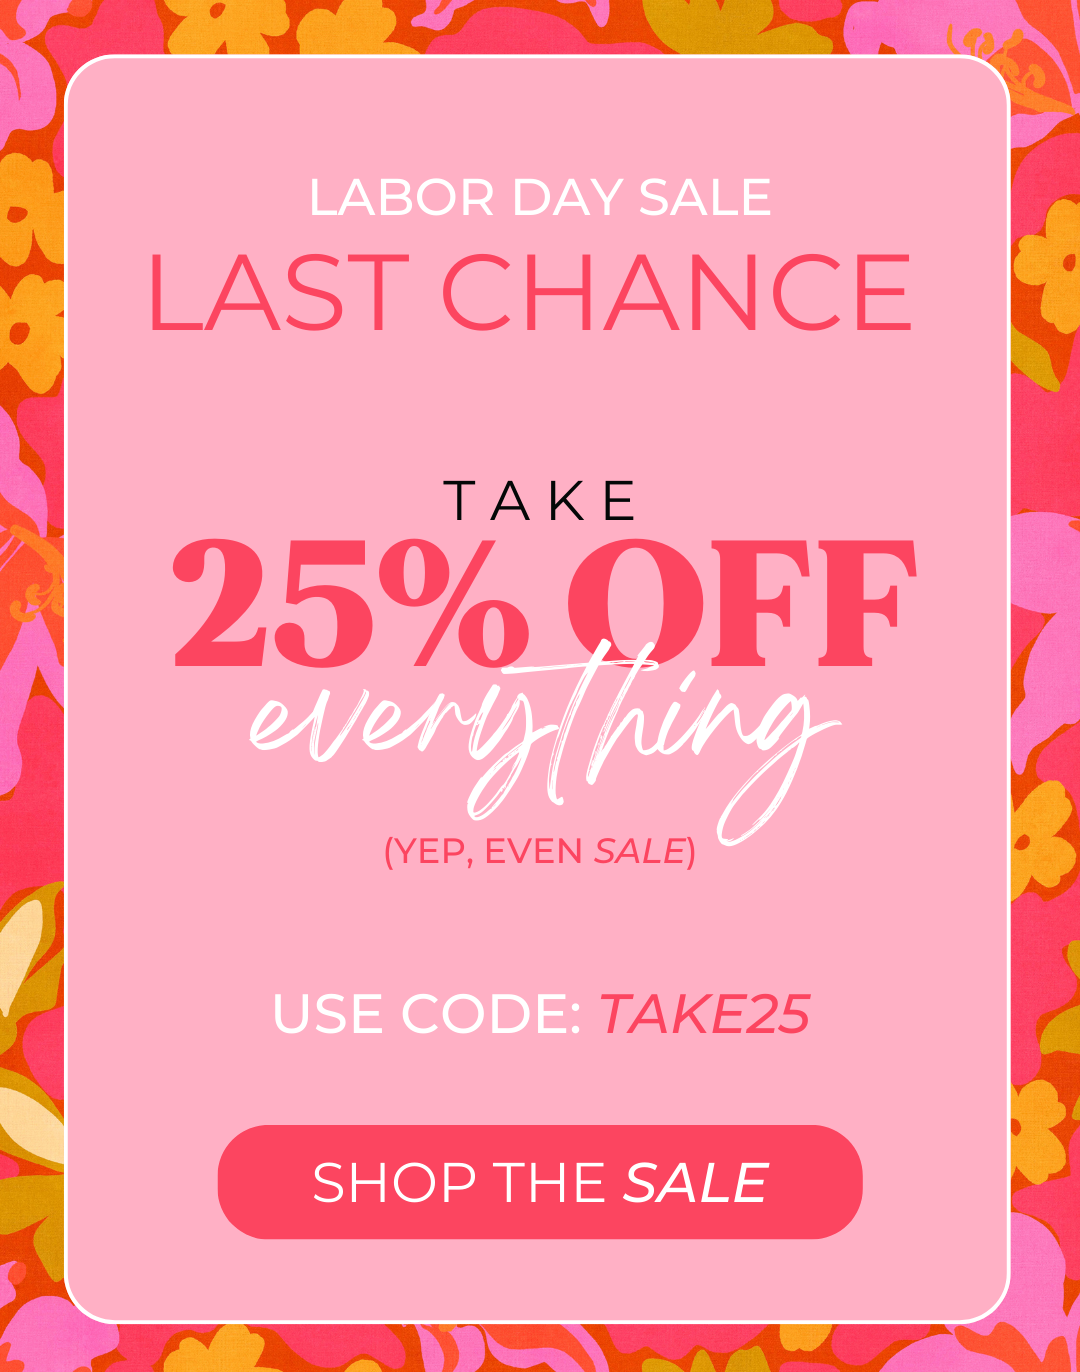 Labor Day Sale LAST CHANCE Take 25% off everything (yep, even sale) use code: TAKE25 Shop the sale